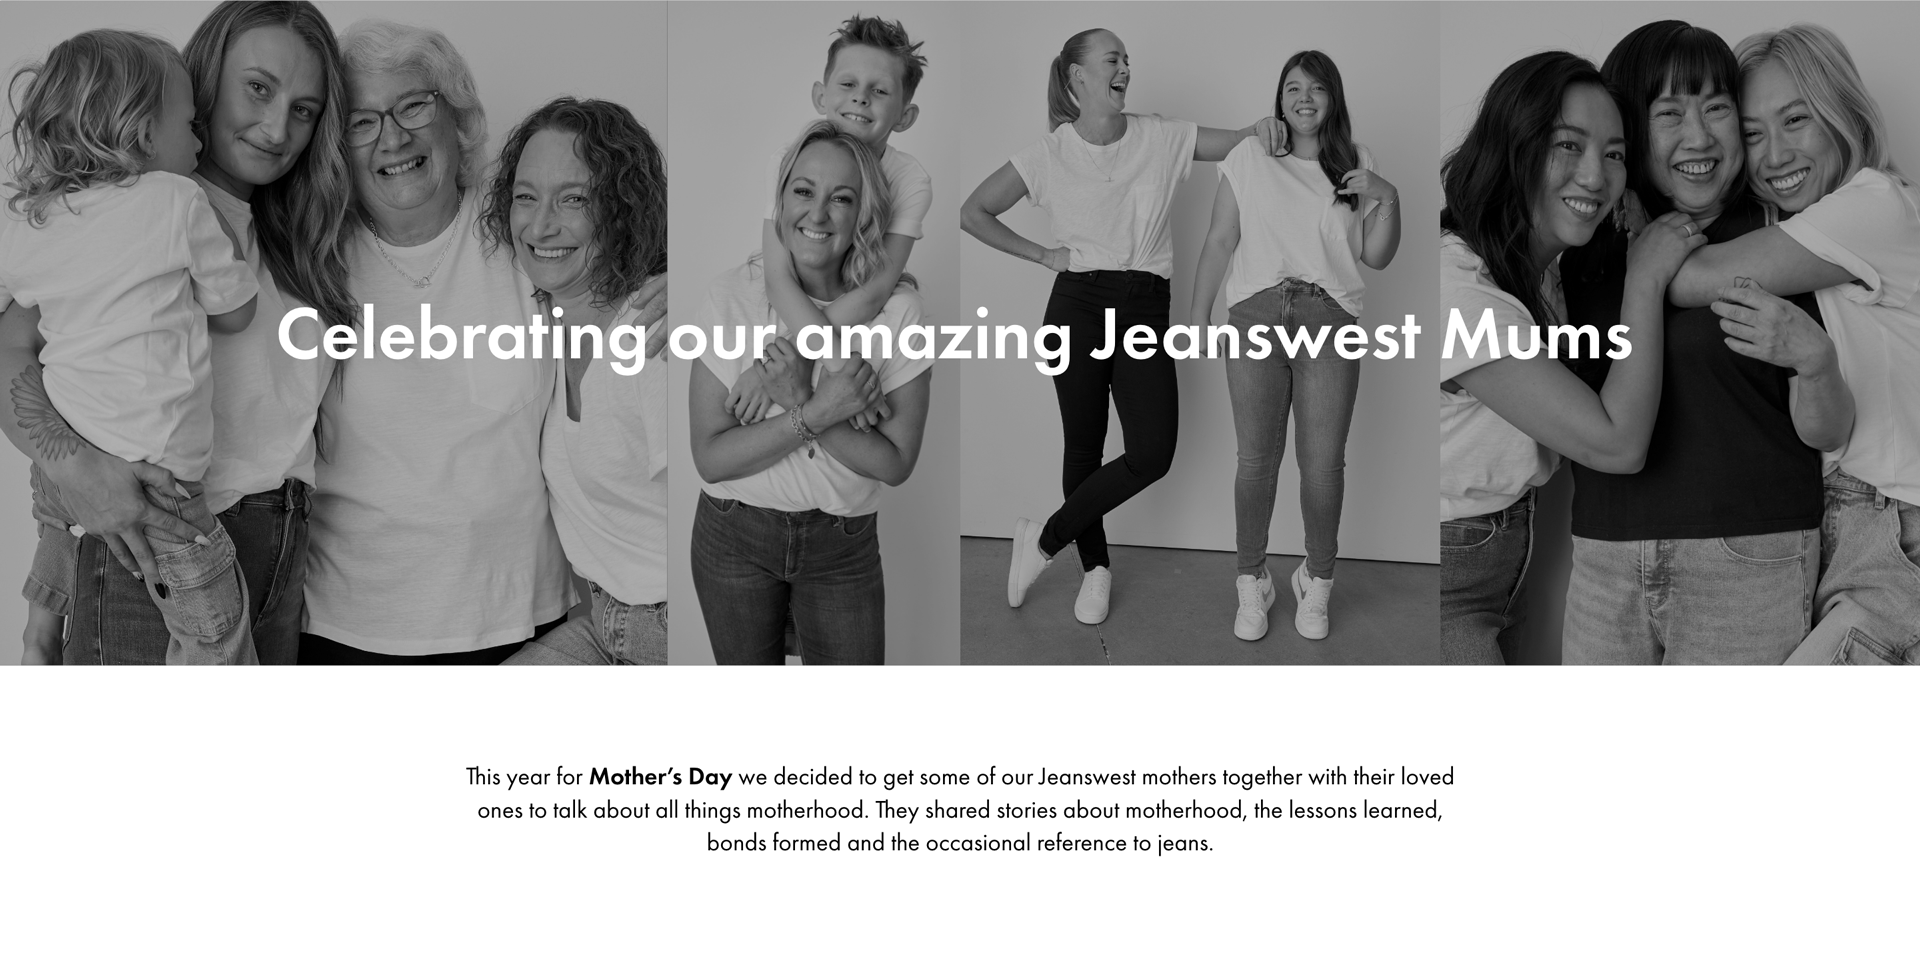 Celebrate Our Amazing Jeanswest Mums